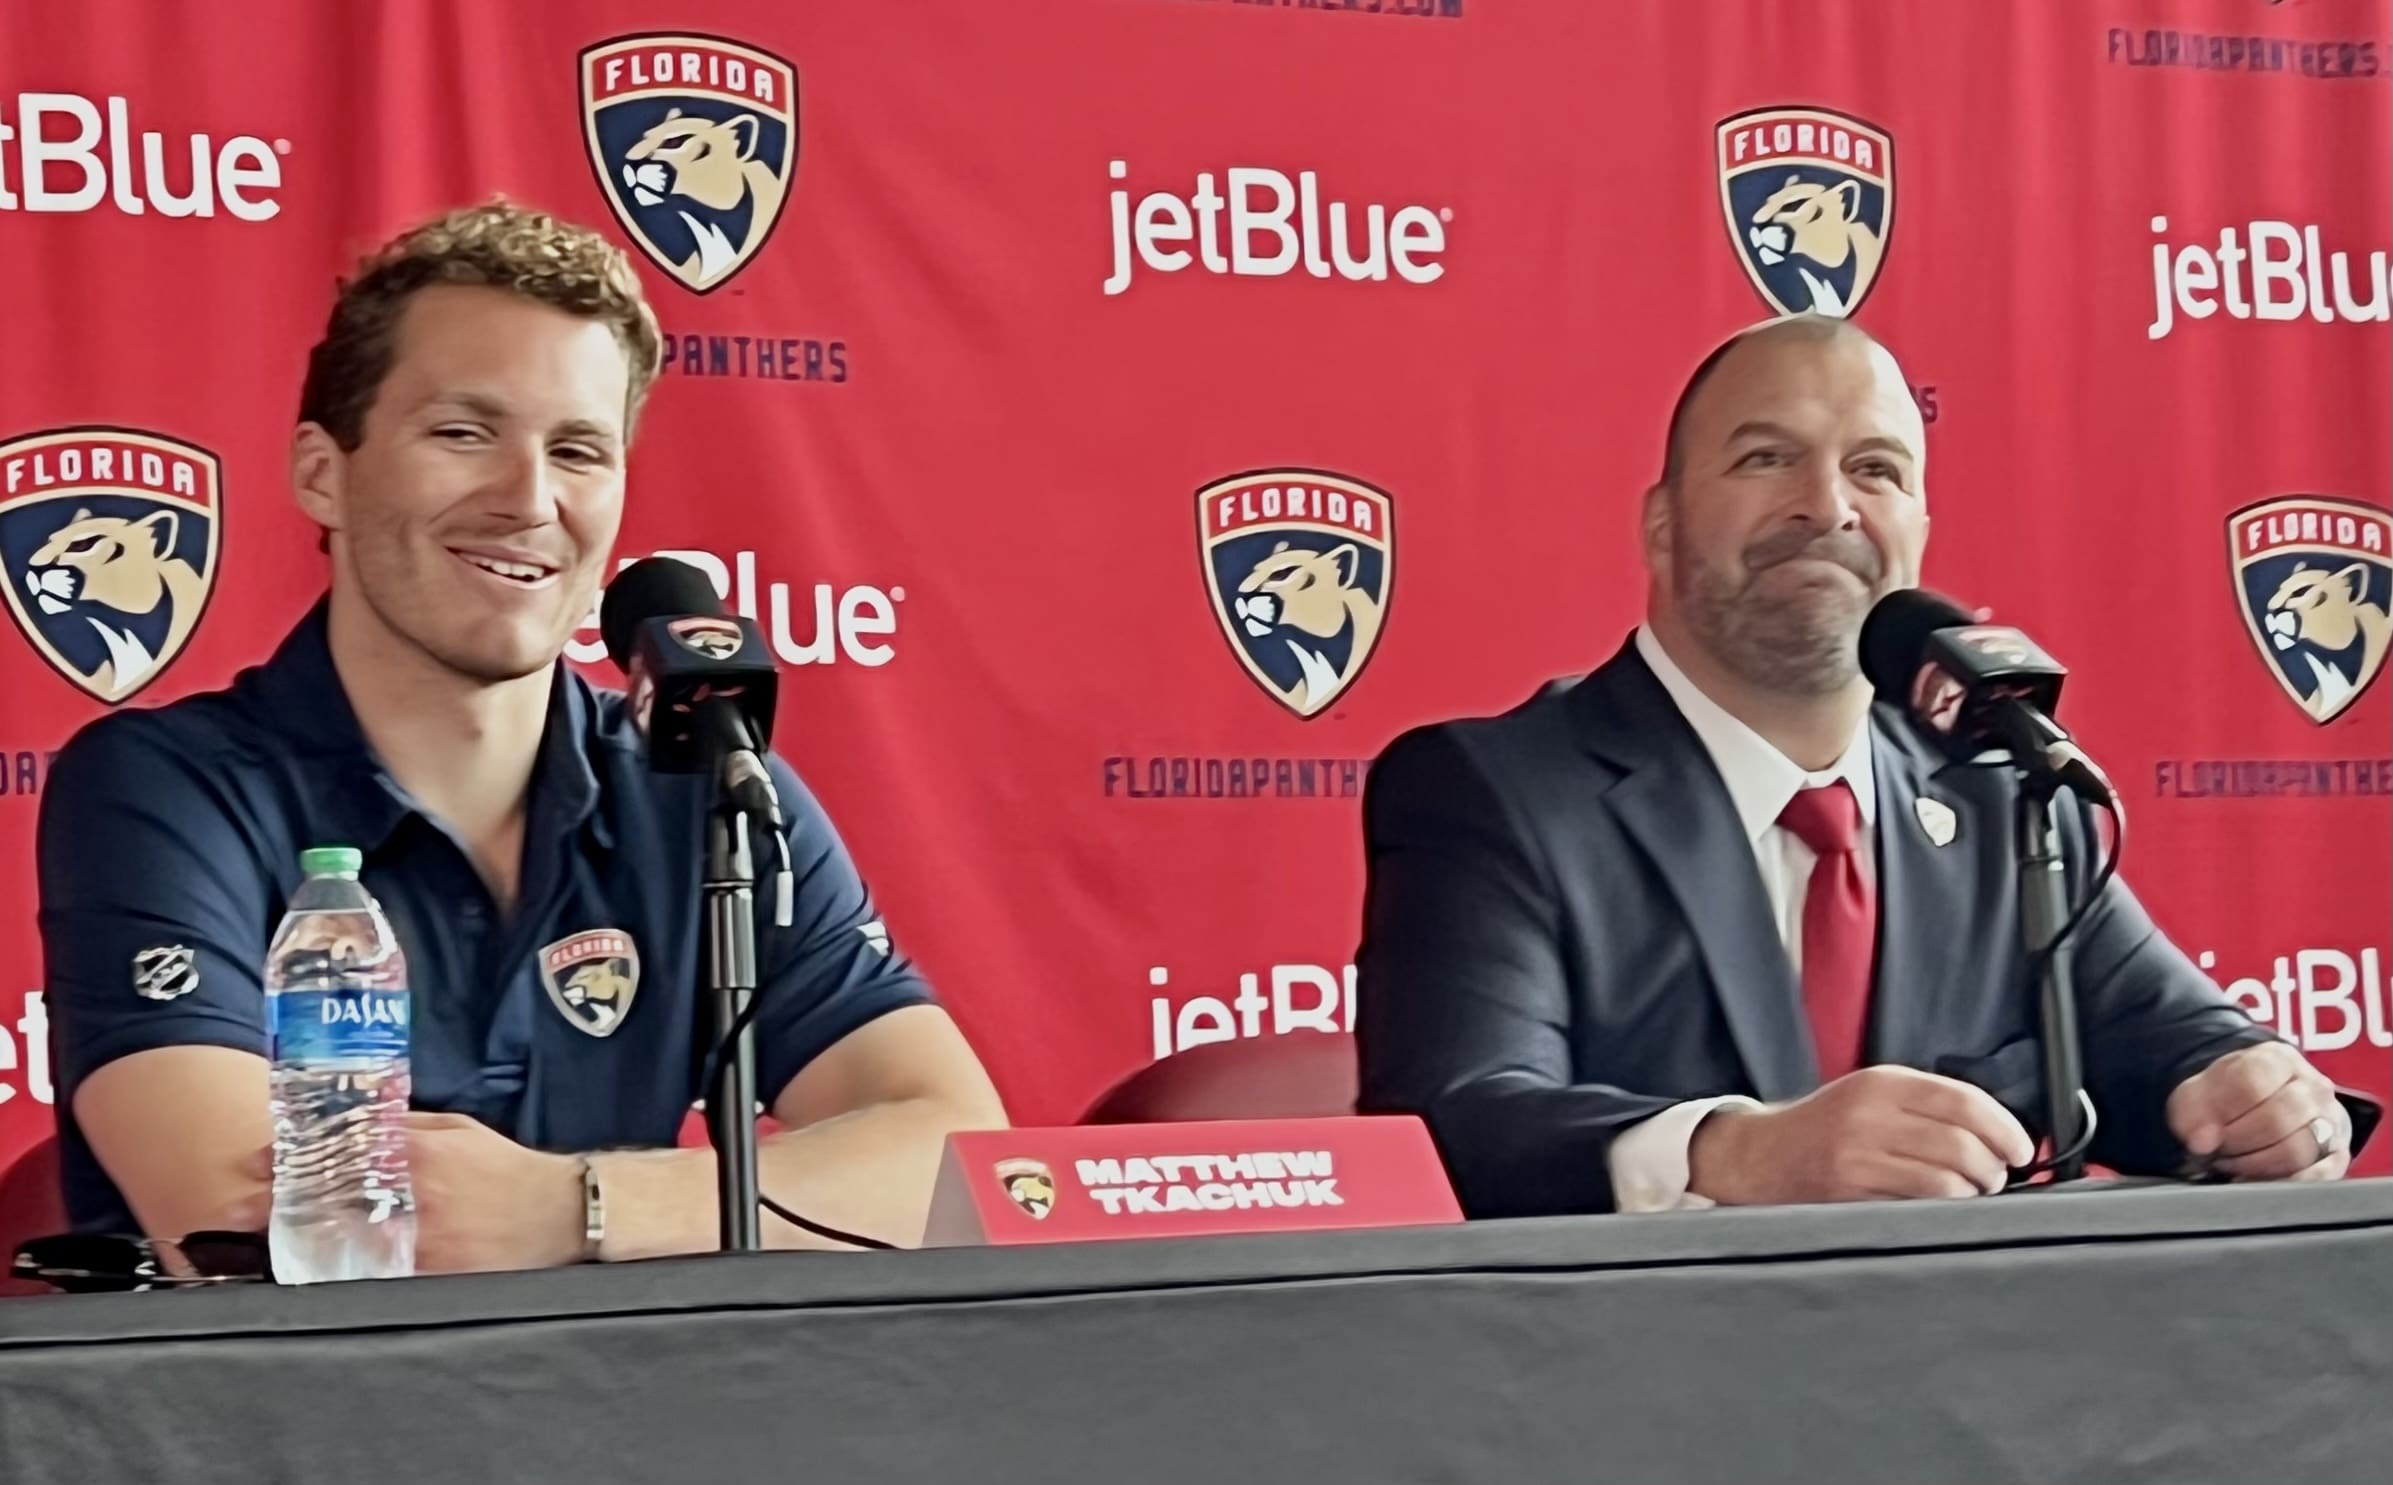 Florida Panthers Announce Multi-Year Extension with LaCroix